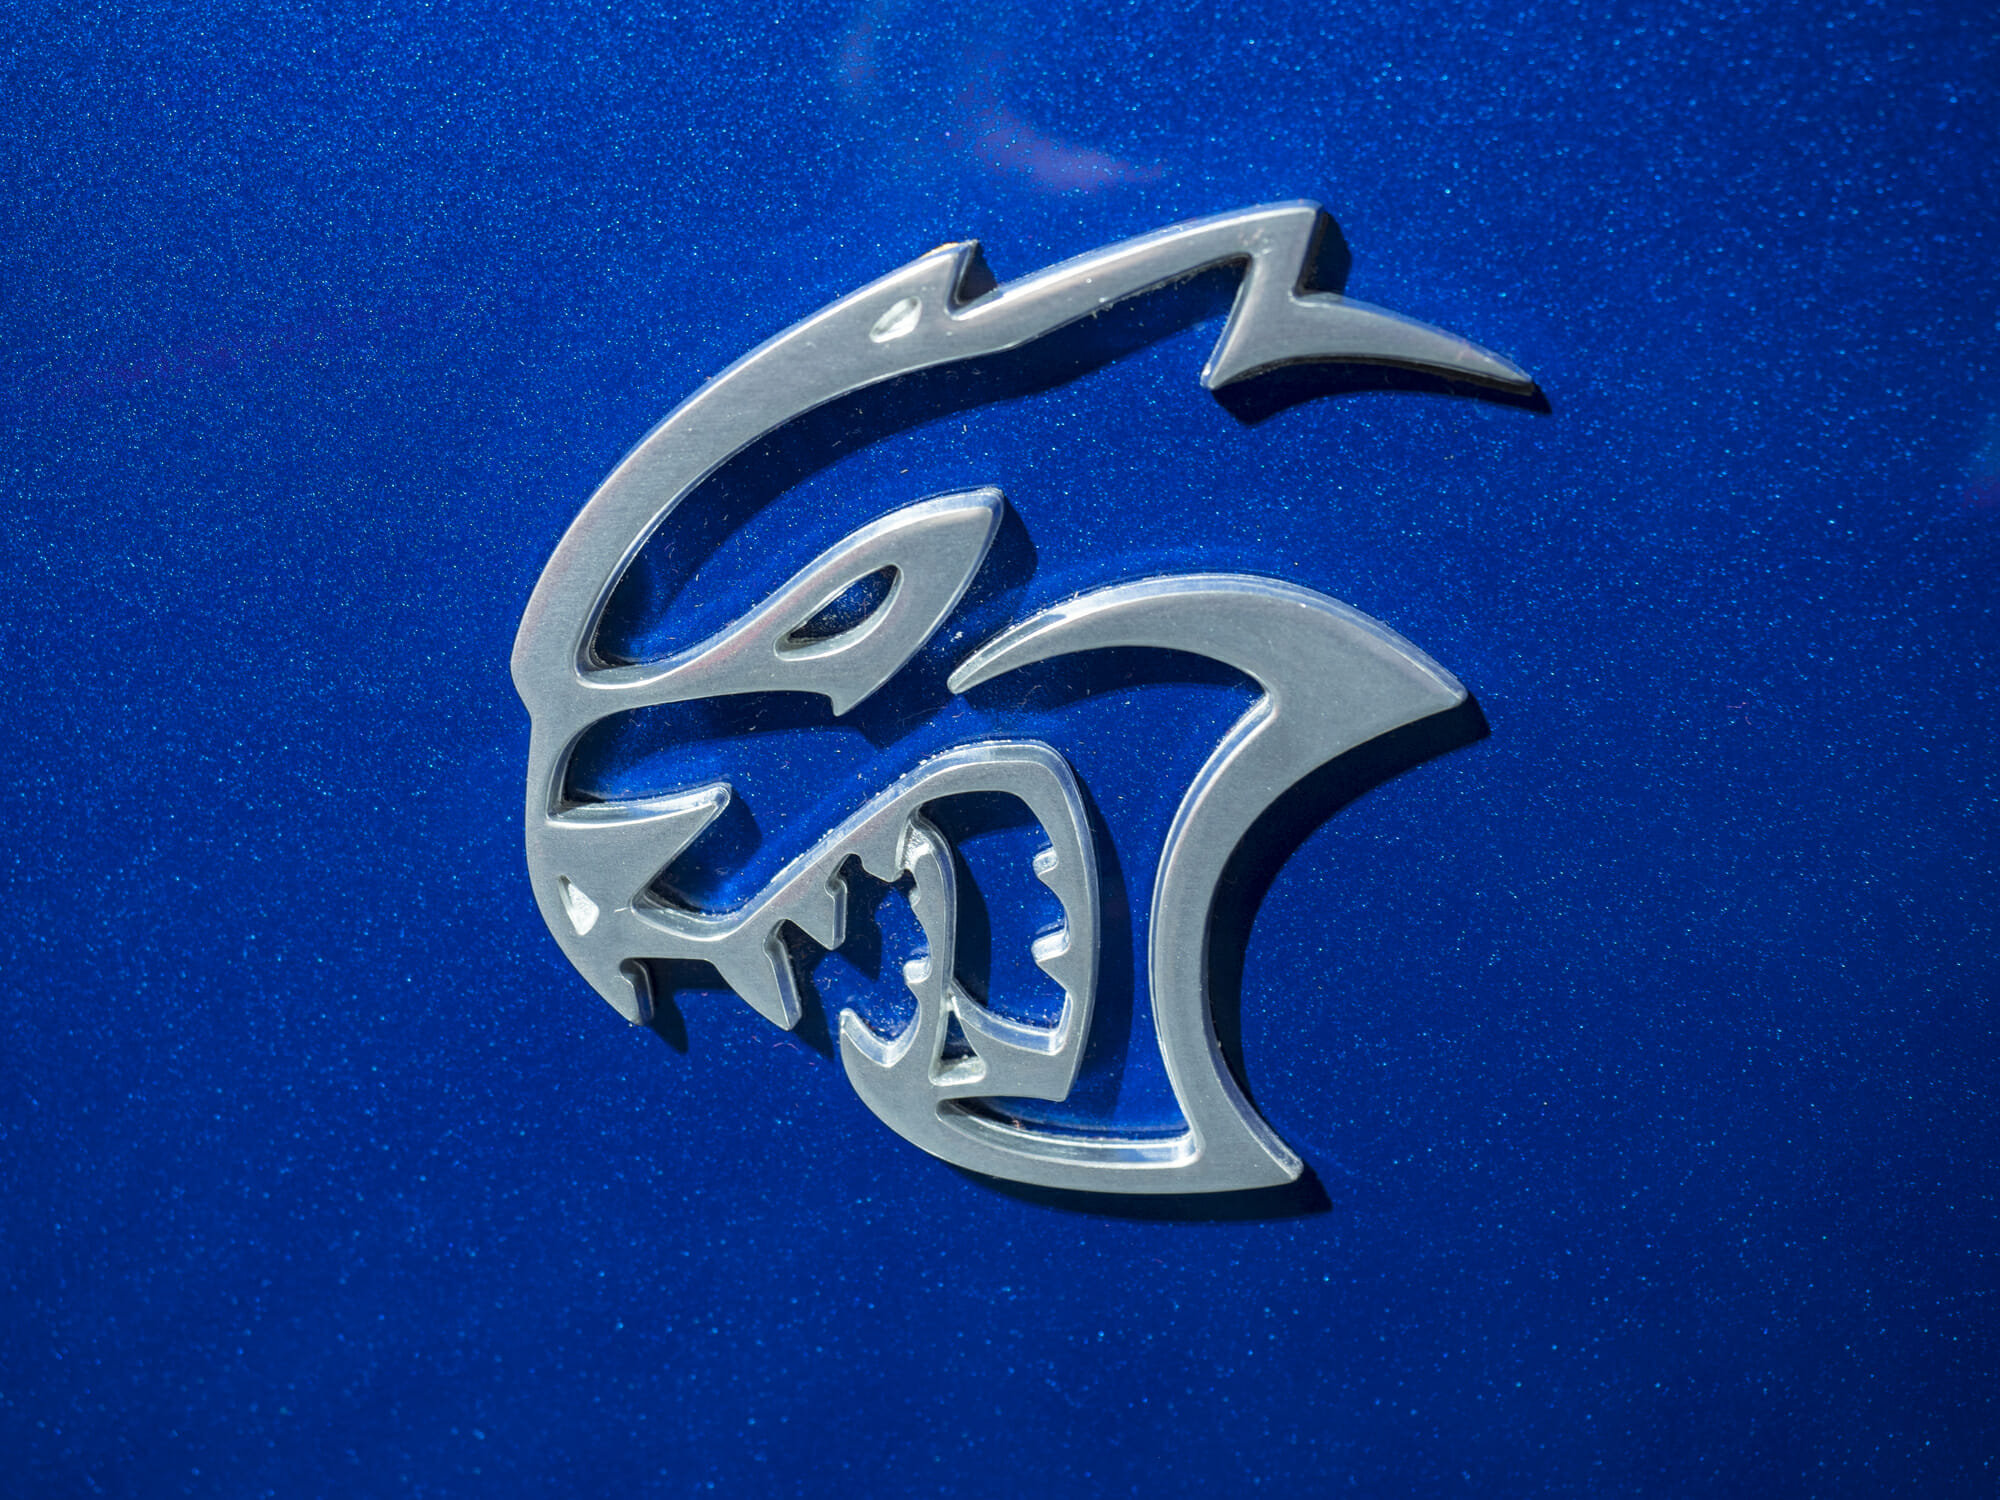 Hellcat logo on Dodge Charger or Challenger - Vehicle Historyk